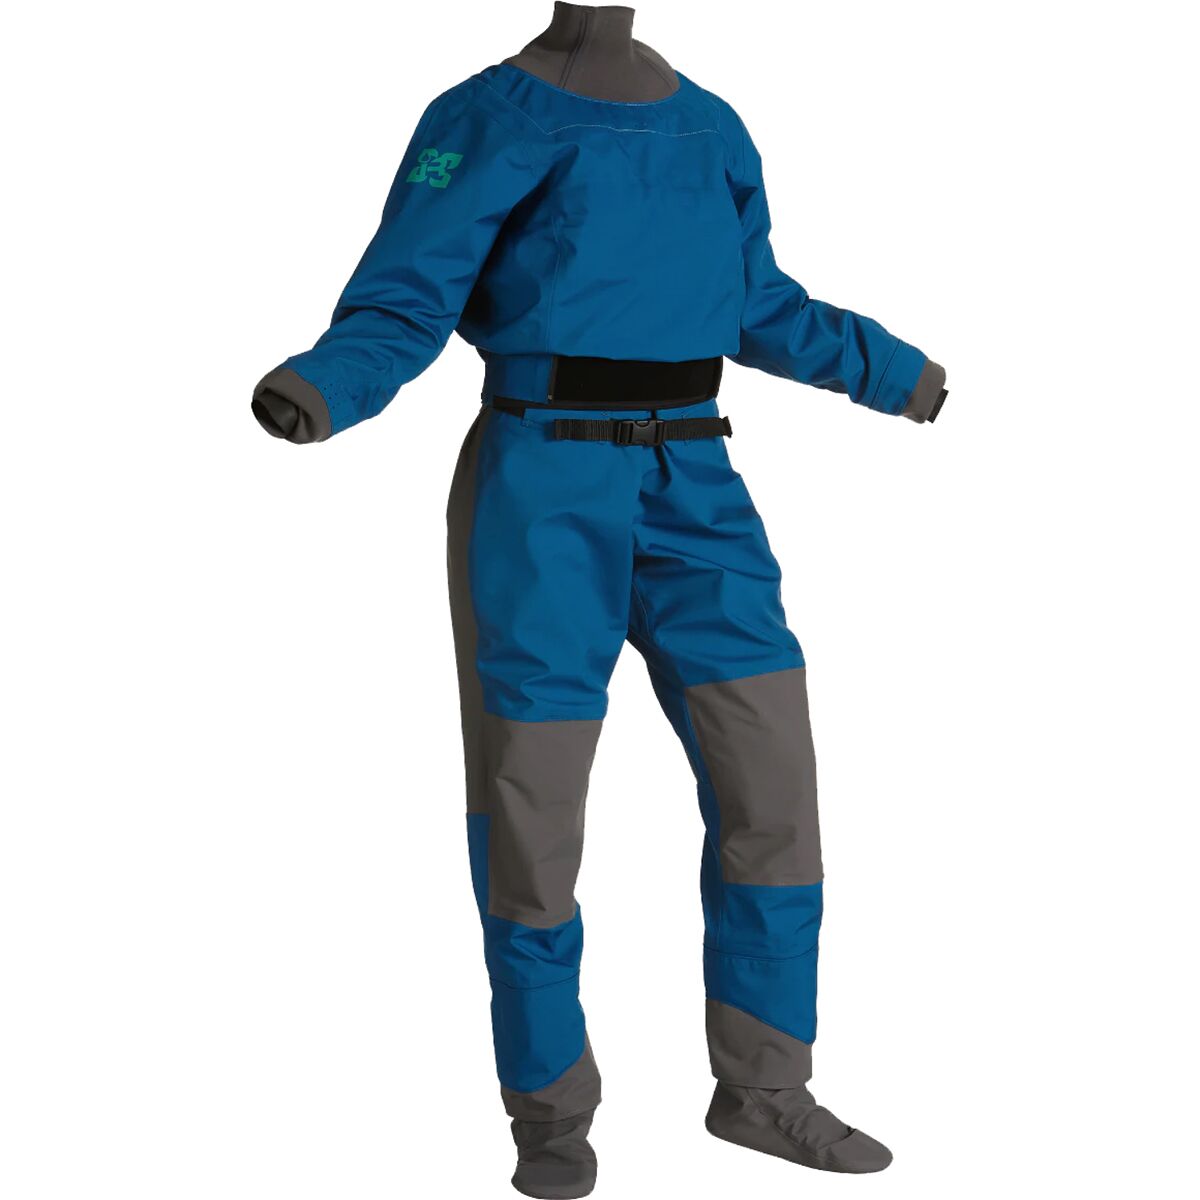 Immersion Research Aphrodite Dry Suit